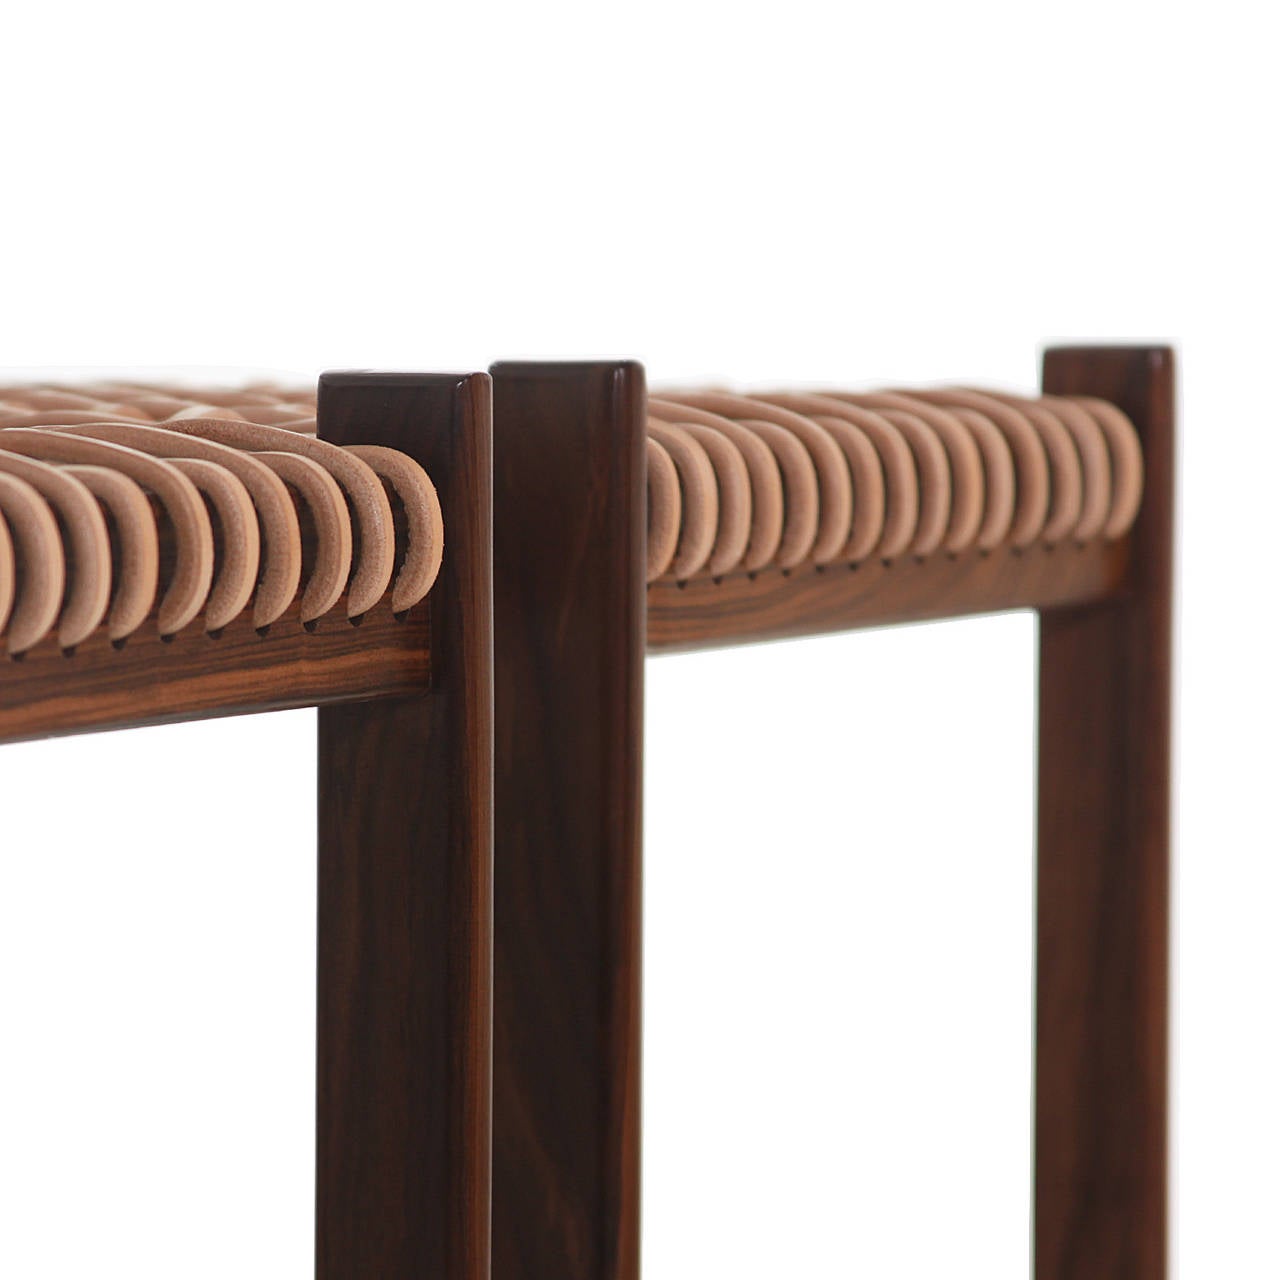 Rosewood The Leather Cord Stool by Thomas Hayes Studio